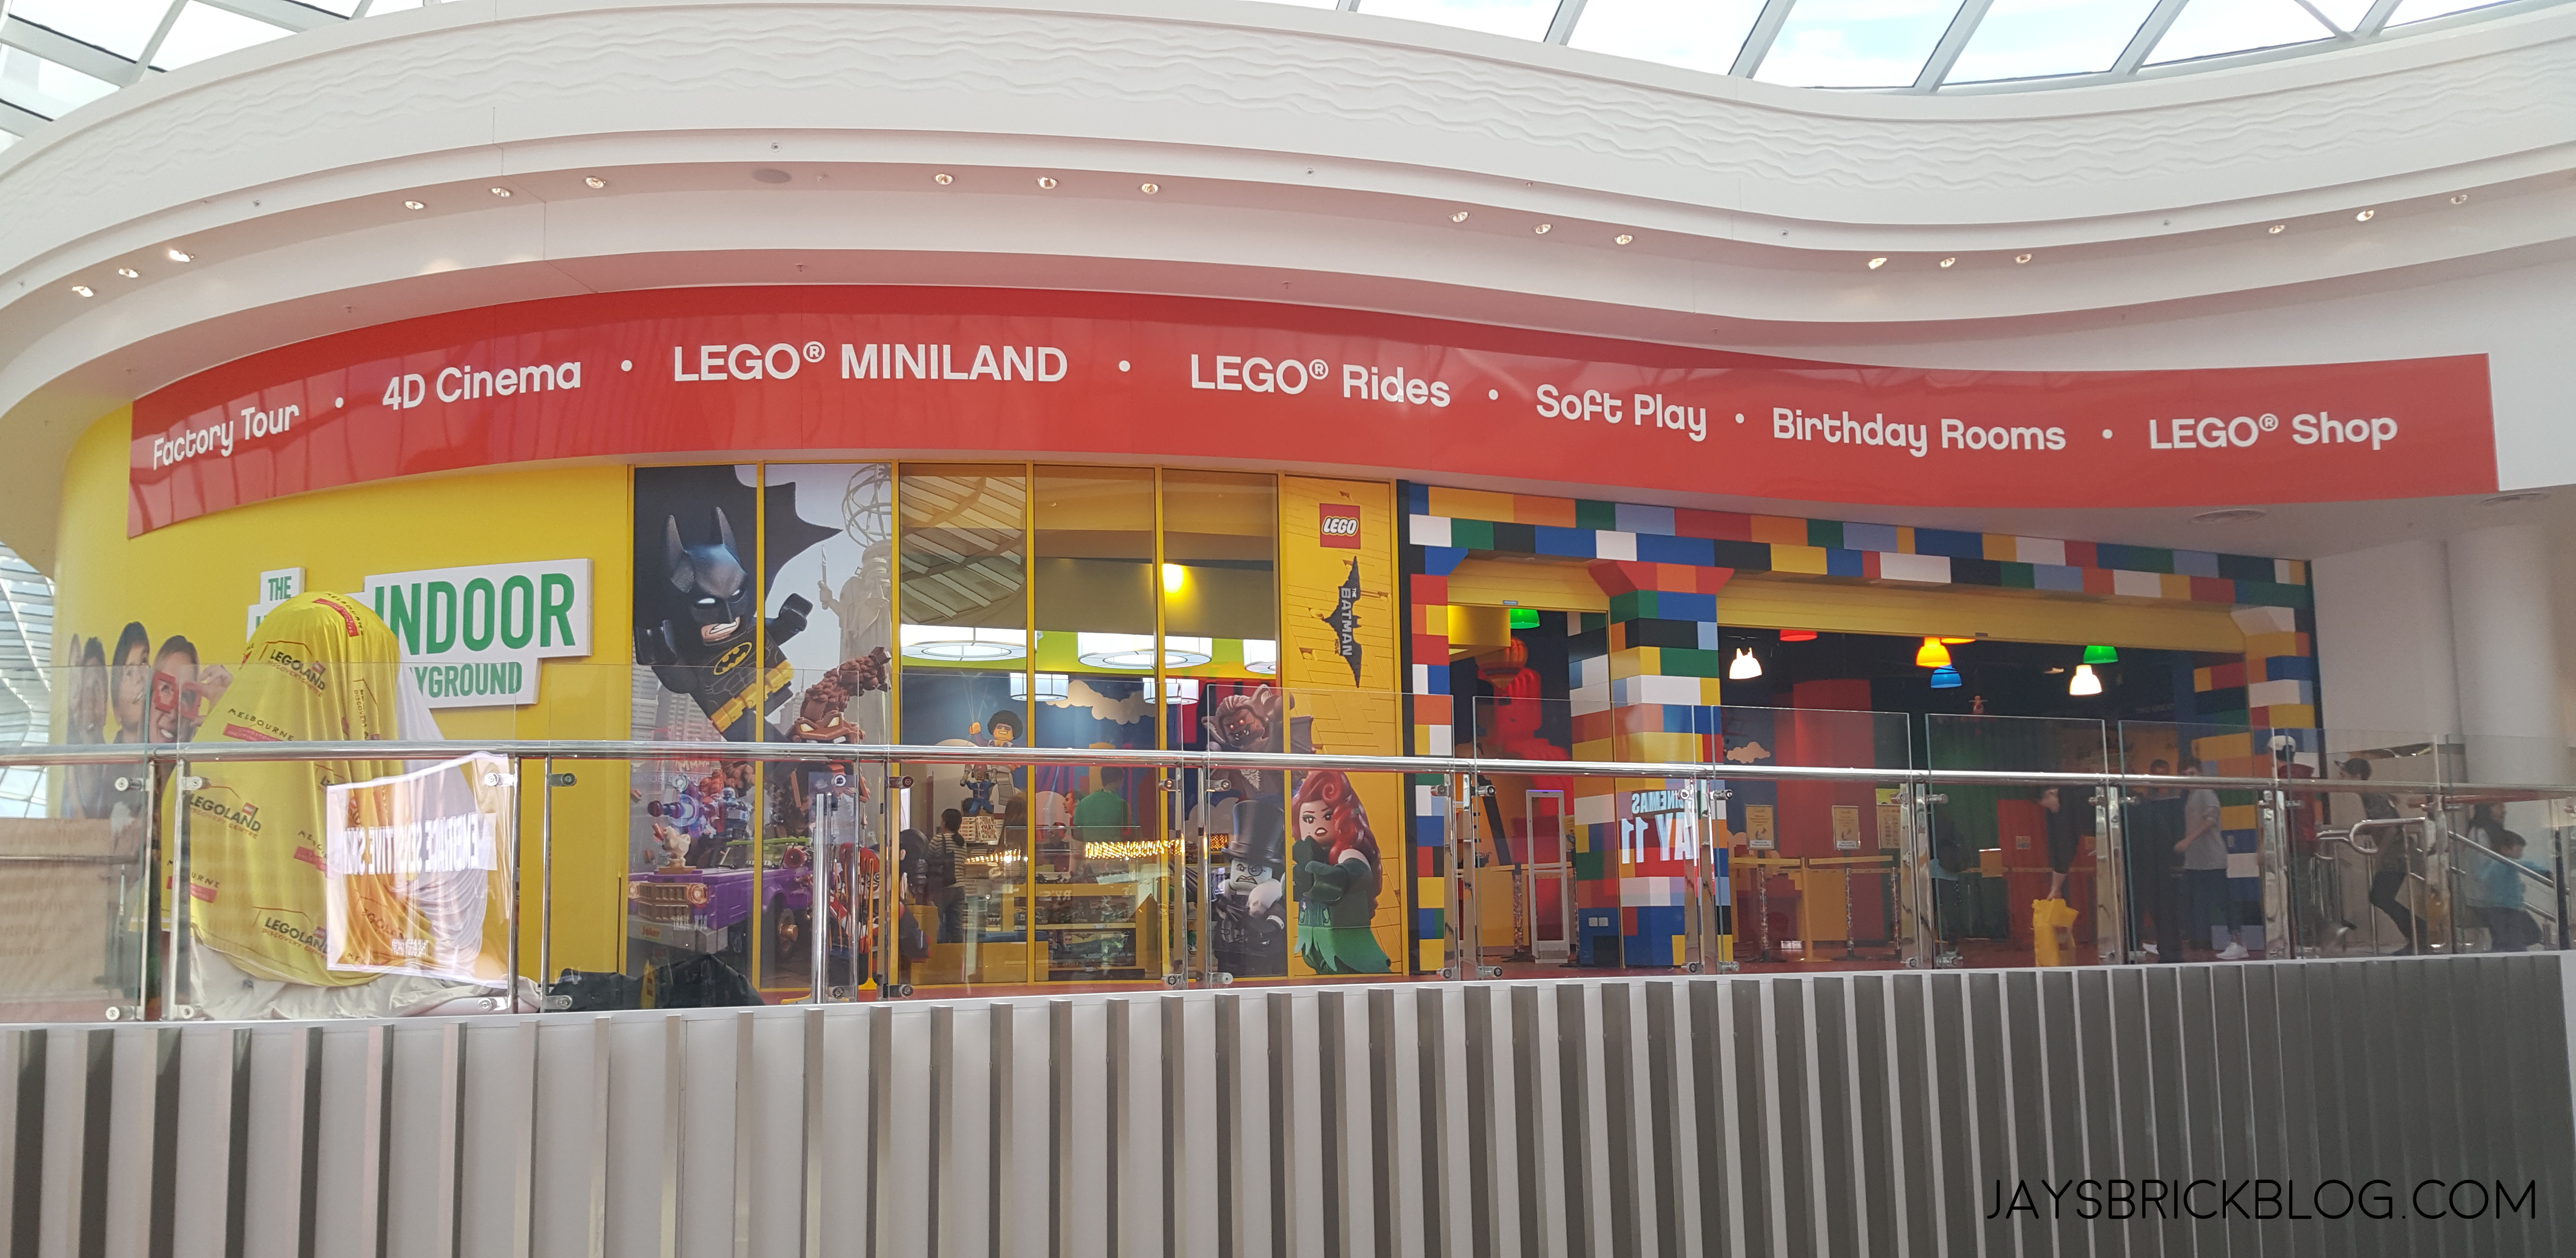 Checking out the LEGO Shop at the Legoland Discovery ...